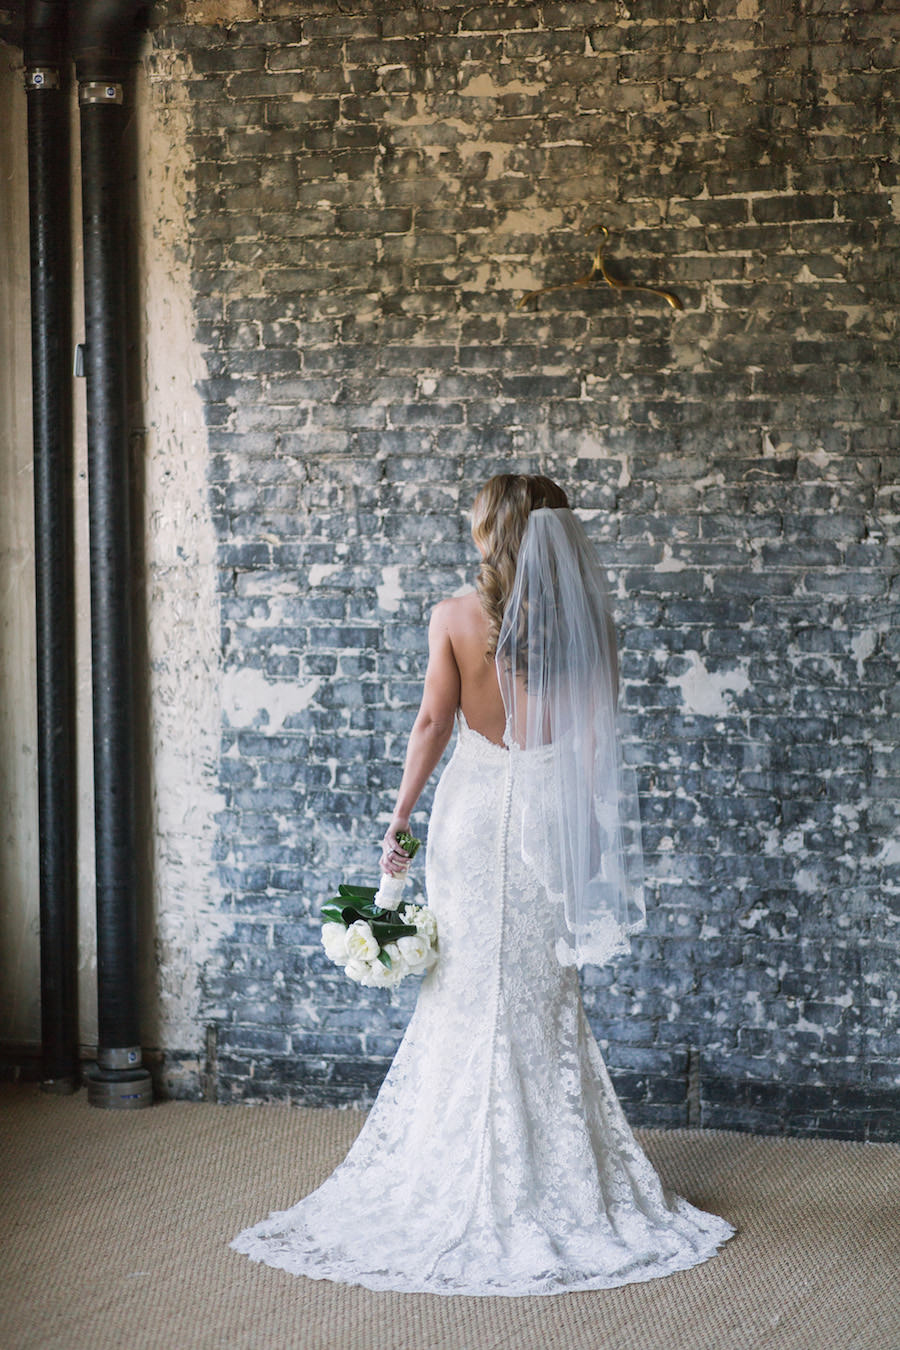 Bridal Wedding Portrait in Ivory, Lace Strapless Dress, Lace Veil, and White Floral Wedding Bouquet of Flowers with Industrial Brick Wall Backdrop